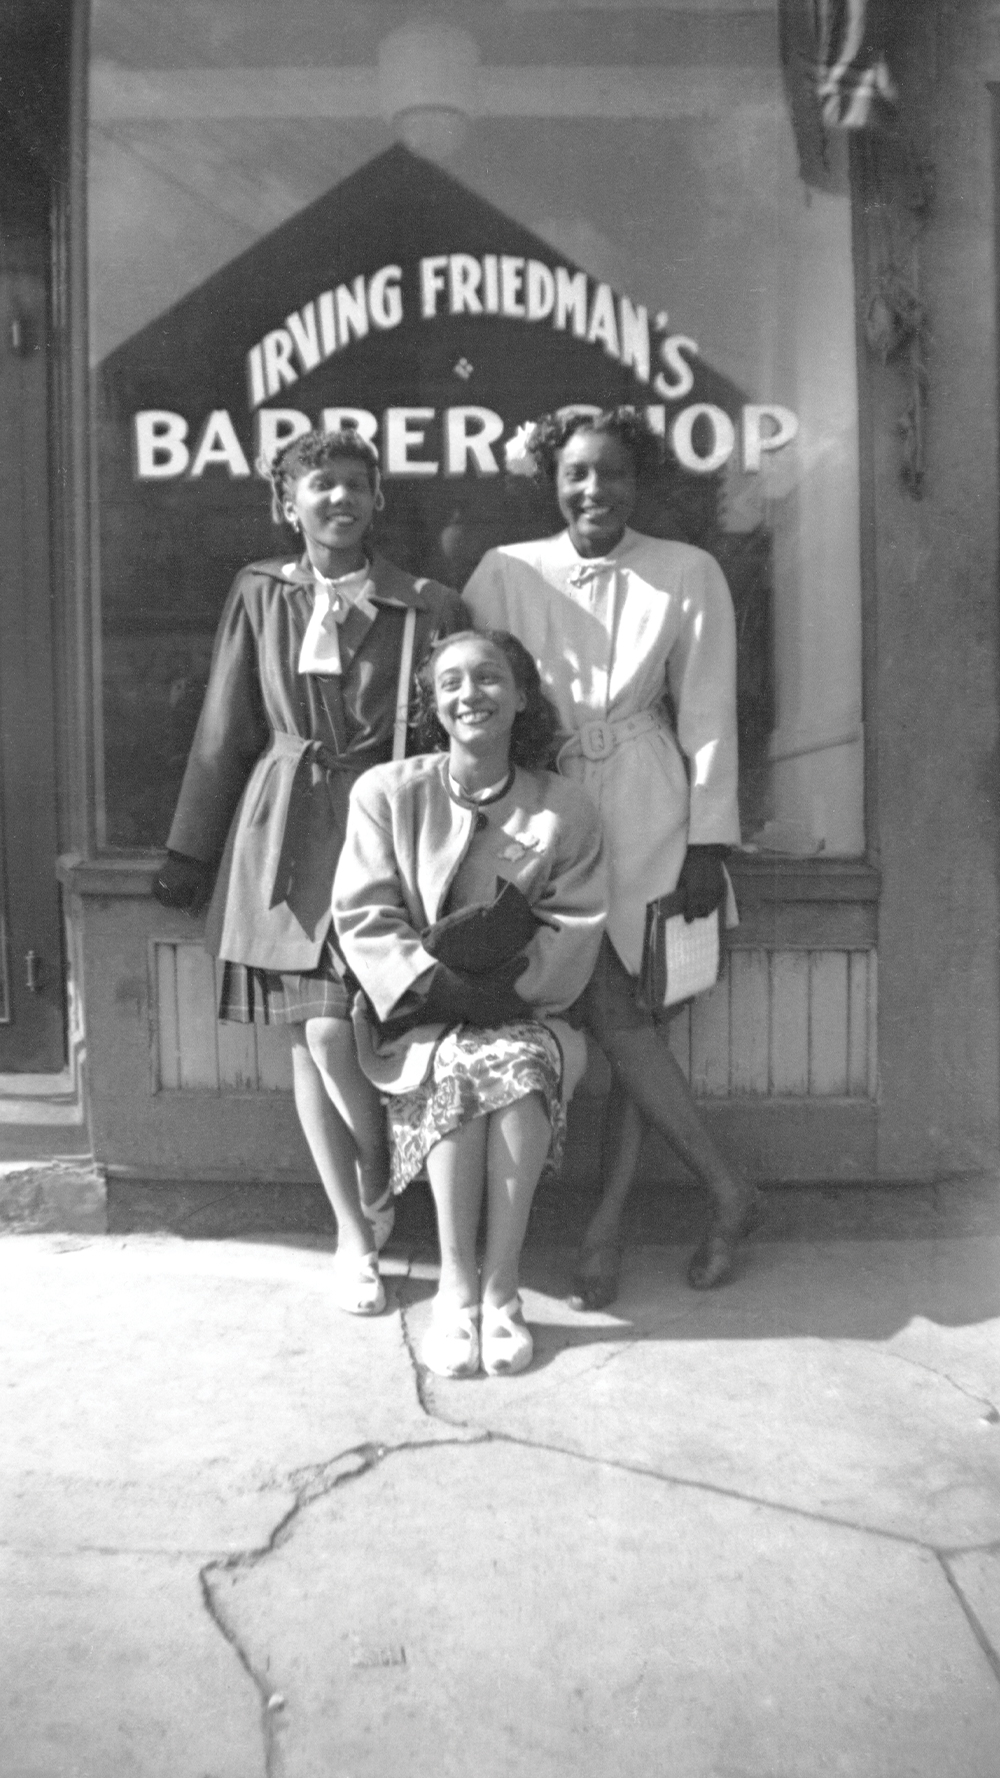 Pictured (left to right): Doris Dunham, Gloria Rohadfox, and Evelyn Branch in front of Irving Friedman’s barbershop.